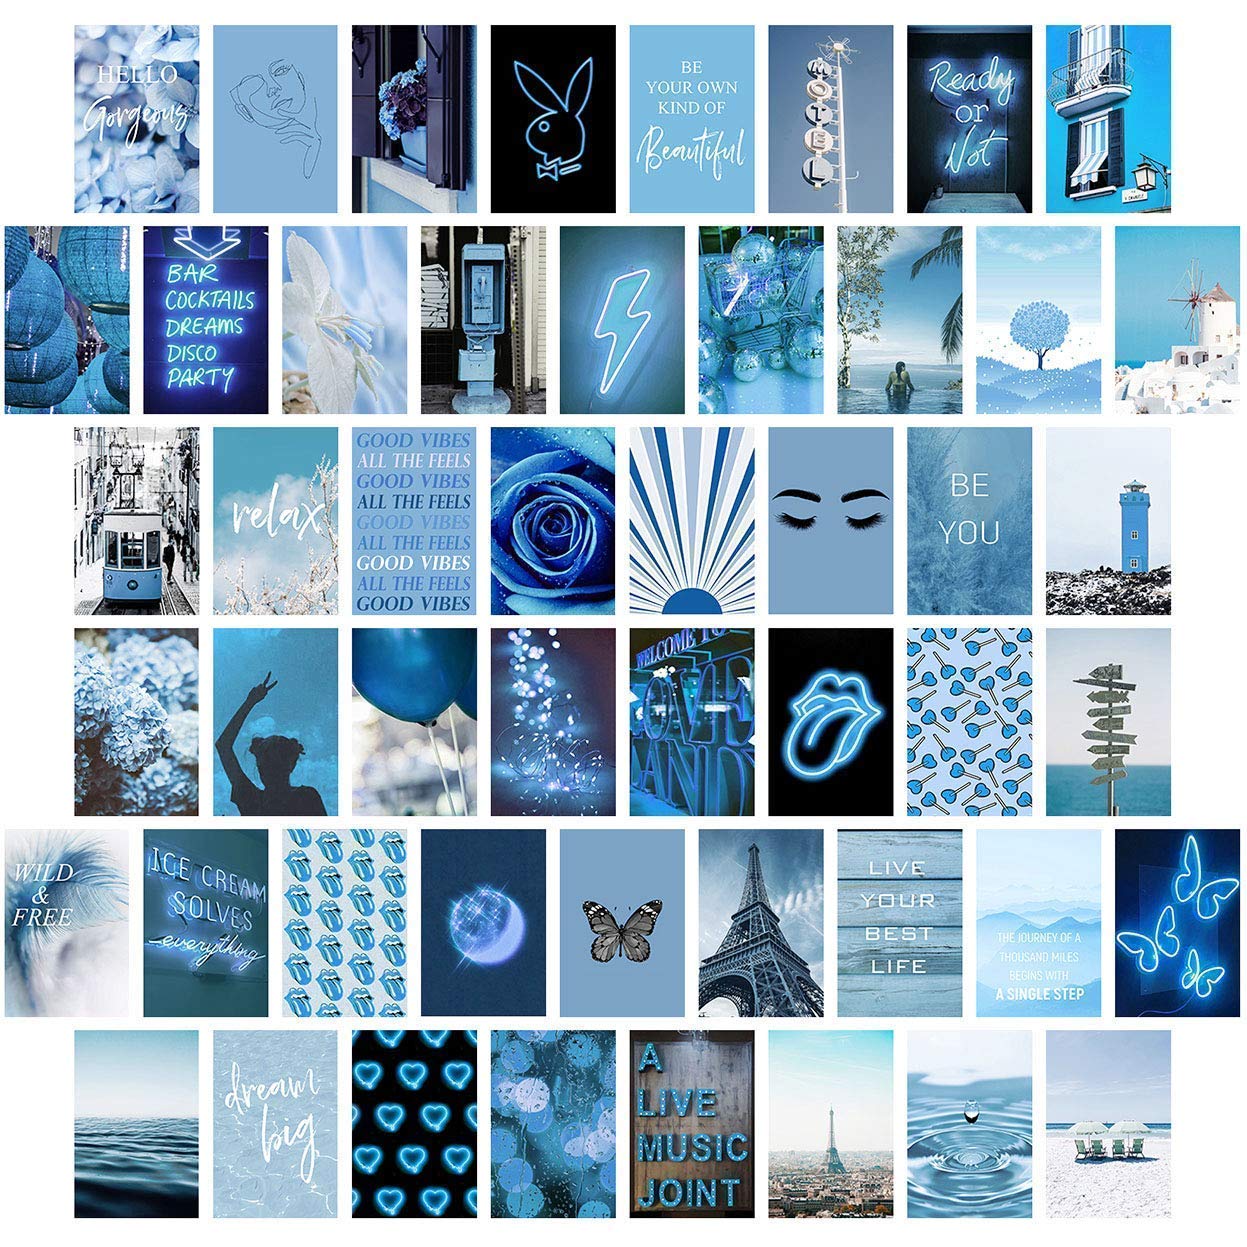 Blue Wall Collage Kit Aesthetic Picture, Bedroom Decor for Teen Girls, Wall Collage Kit, Collage Kit for Wall Aesthetic, VSCO Girls Bedroom Decor, Aesthetic Posters, Collage Kit, Handmade Products